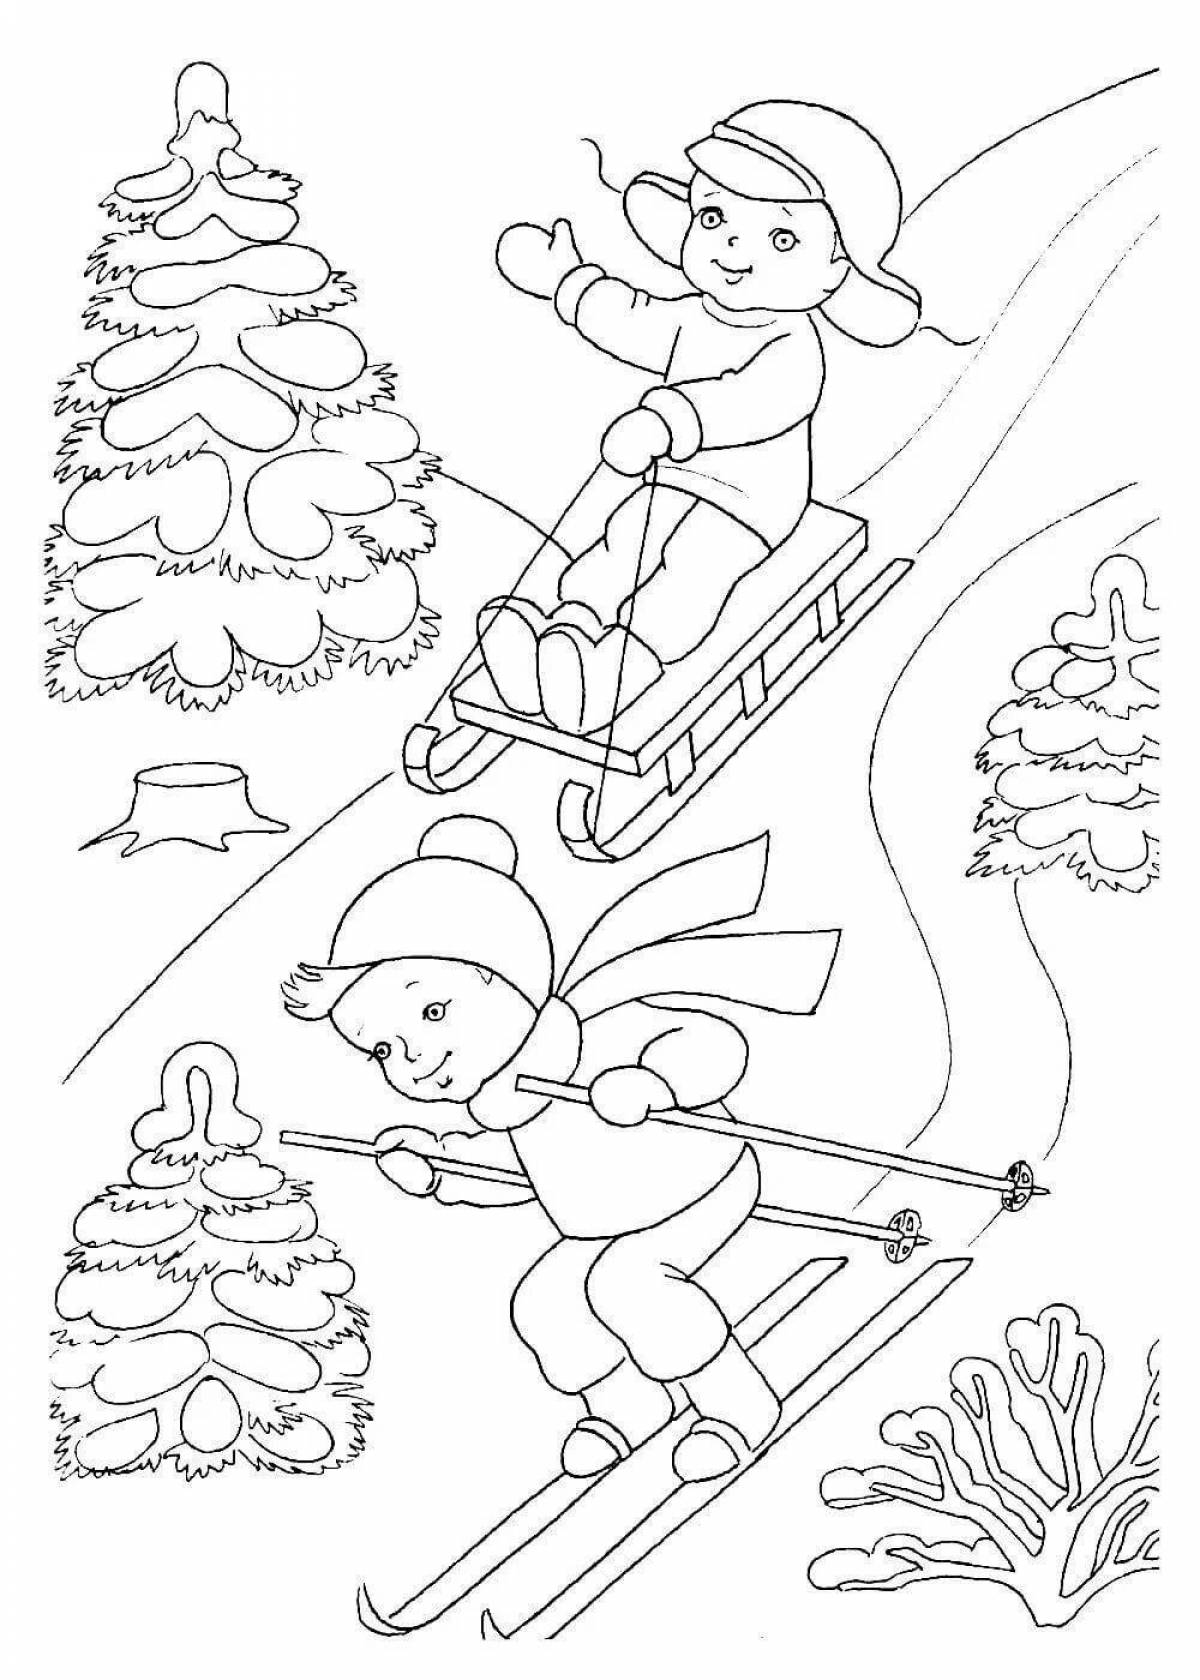 Colourful coloring book for children in winter